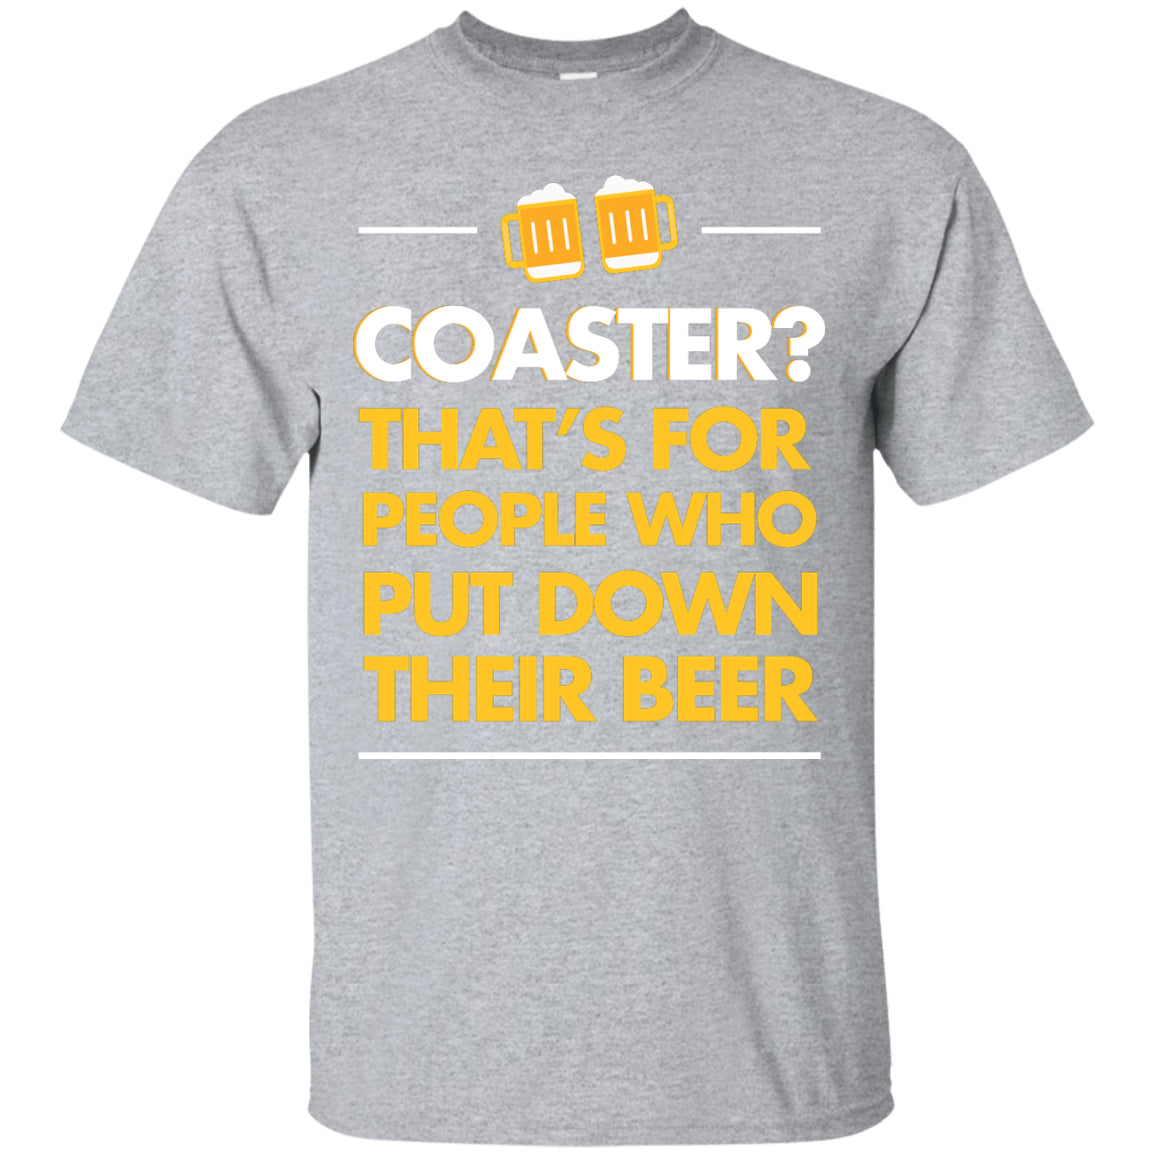 Coaster? That's For People Who Put Down Their Beer T-Shirt Apparel - The Beer Lodge